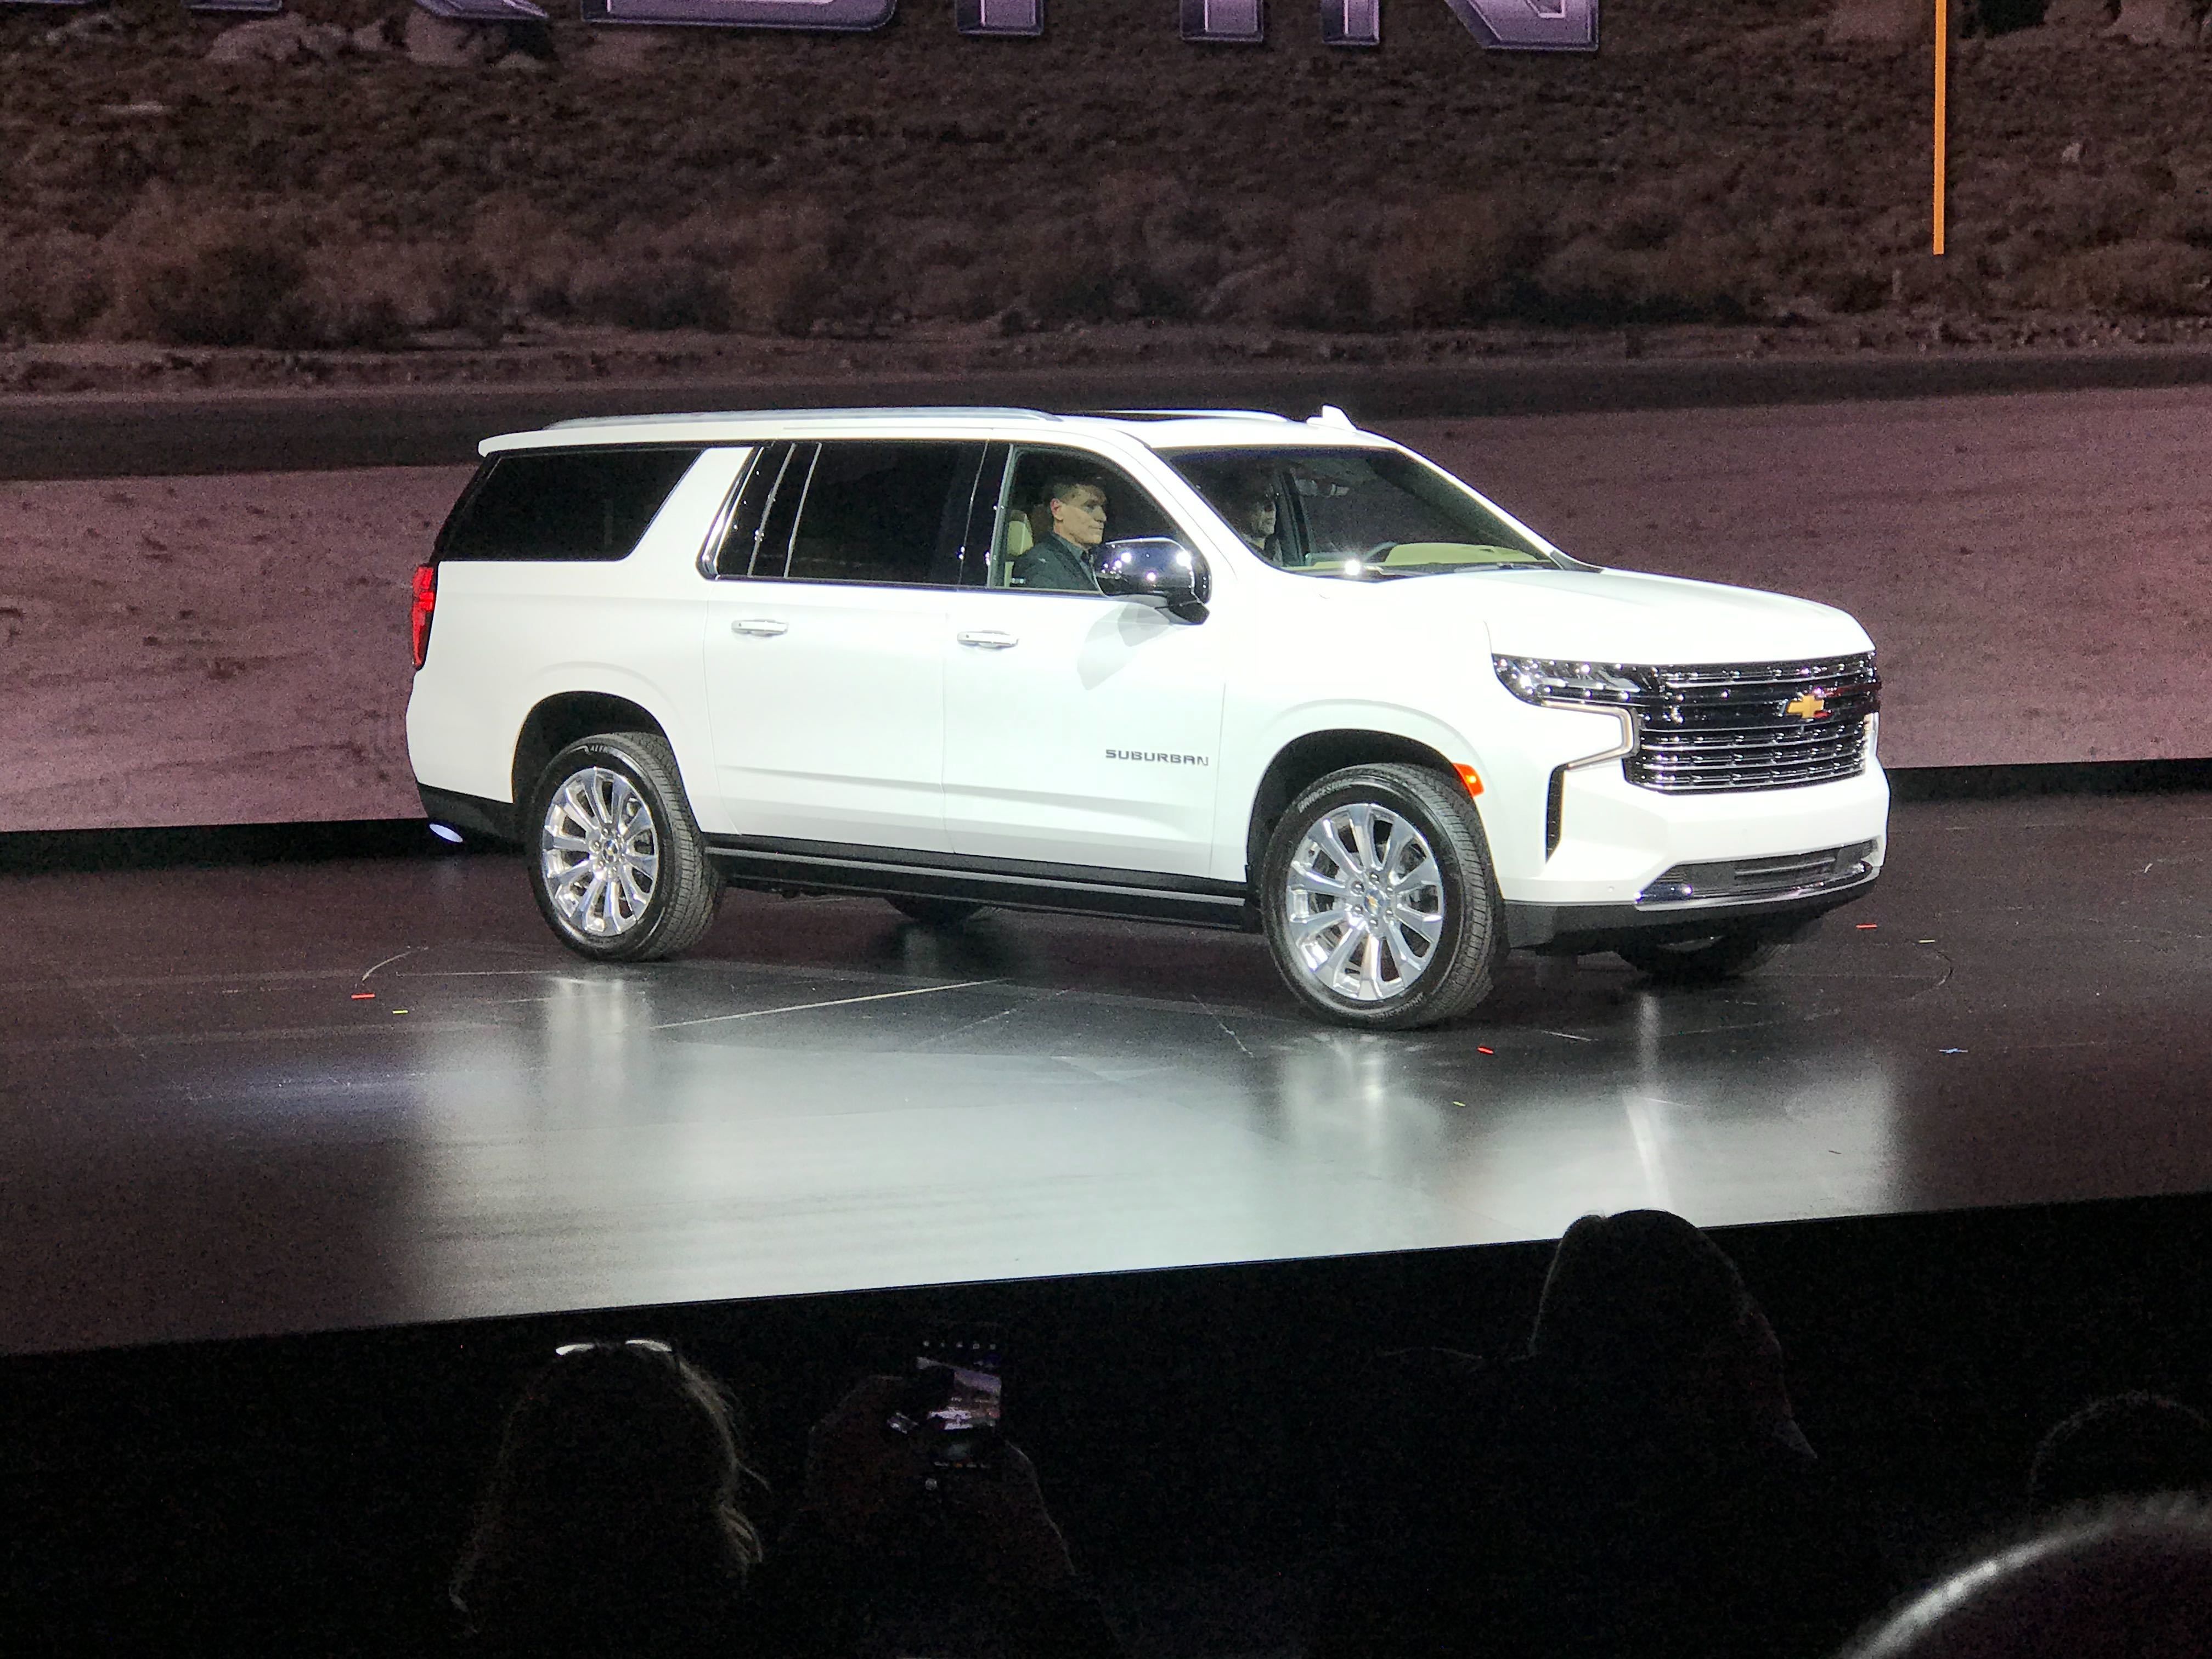 2021 Chevy Suburban And Tahoe Revealed